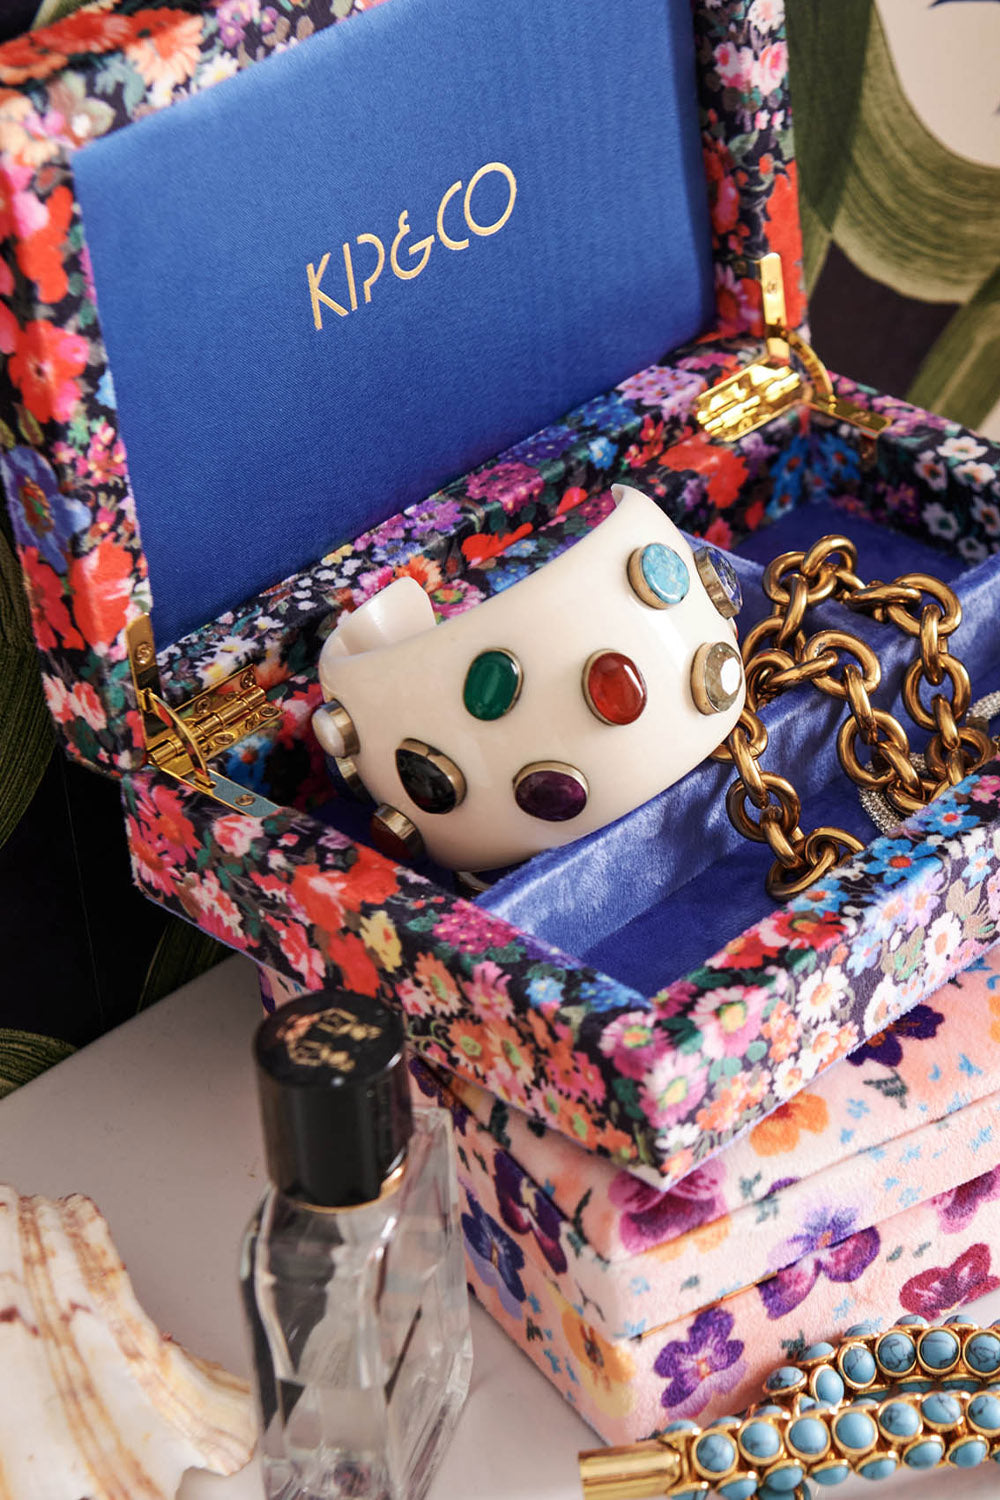 KIP & CO | Small Jewellery Box - Forever Floral